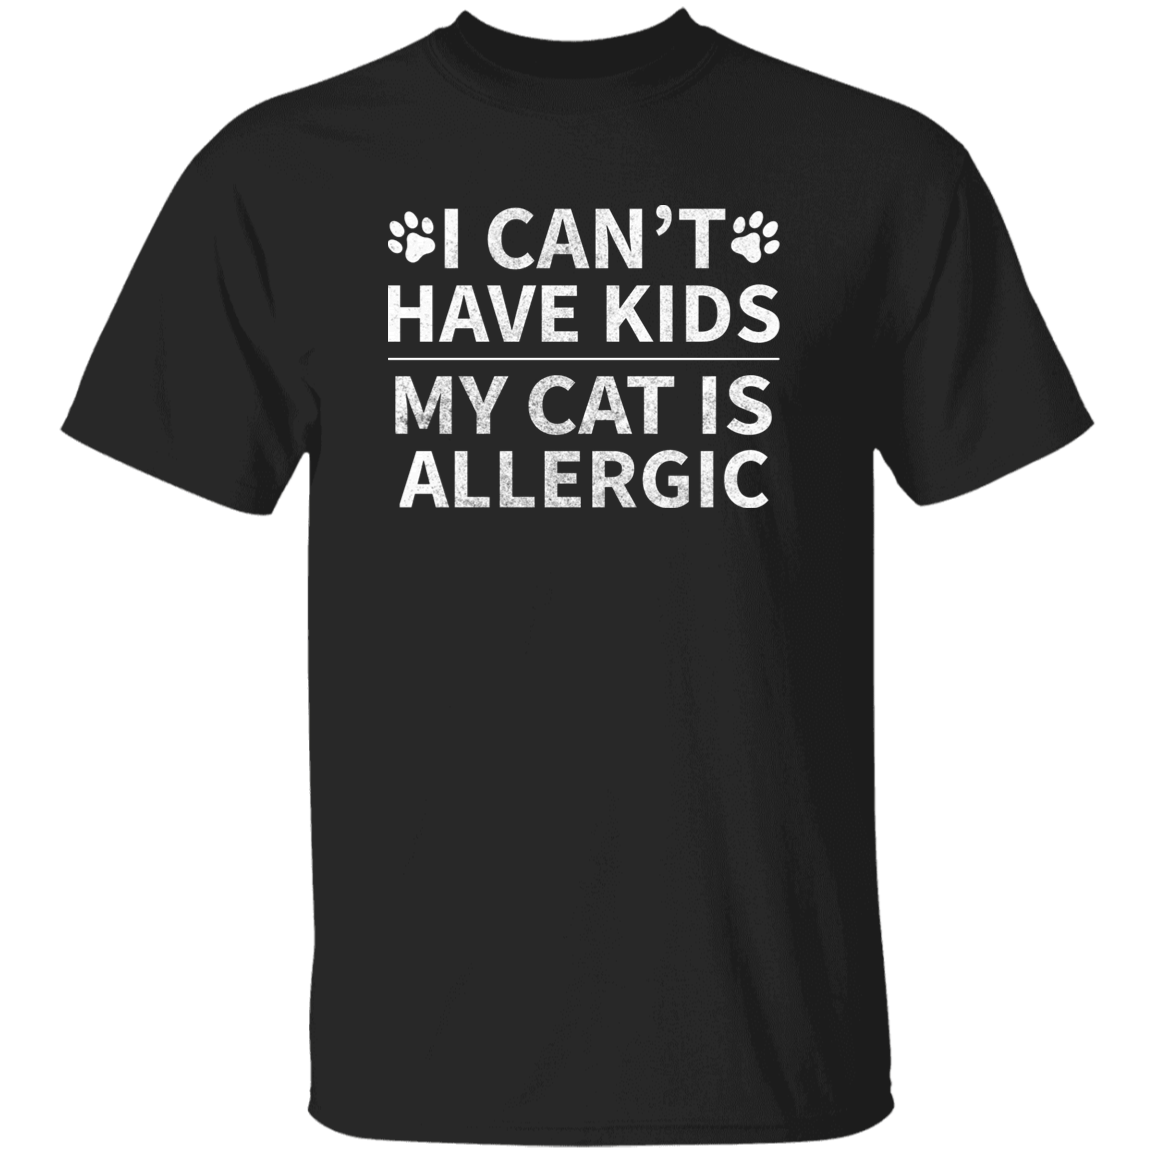 My Cat Is Allergic - T Shirt.